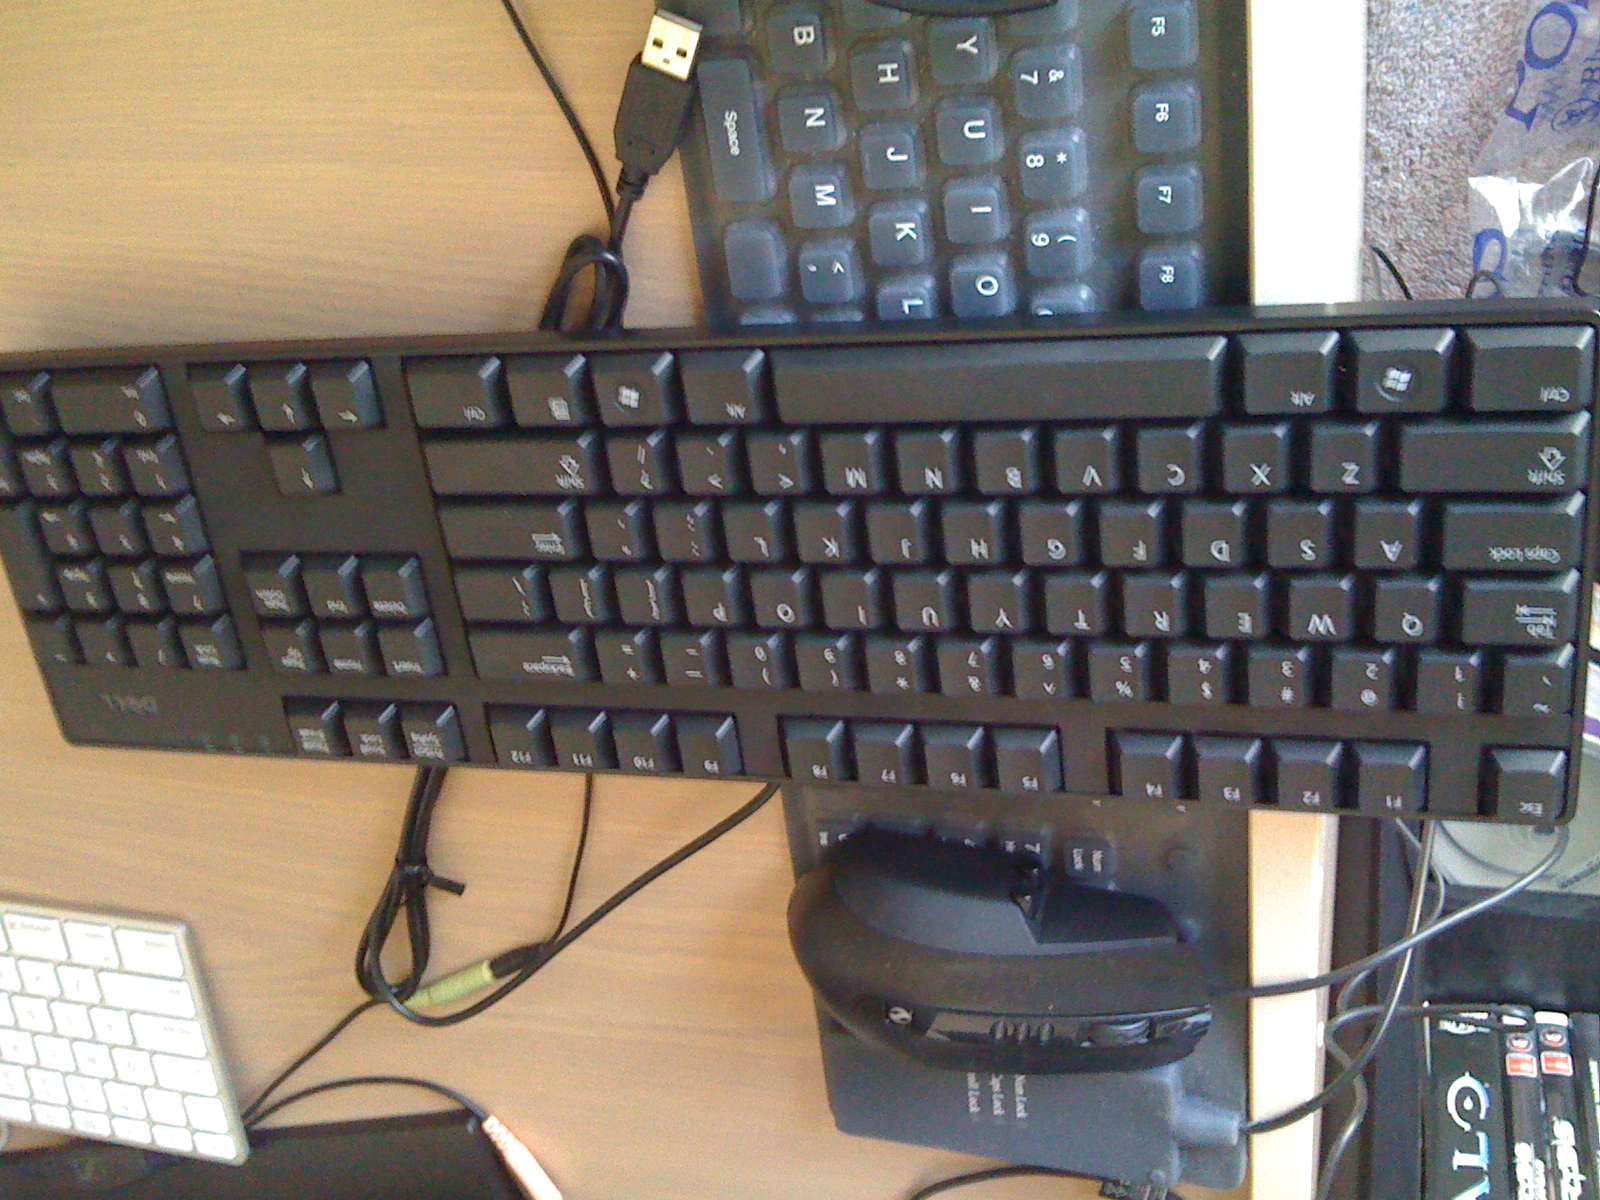 The best worst keyboard with my two other keyboards of the time